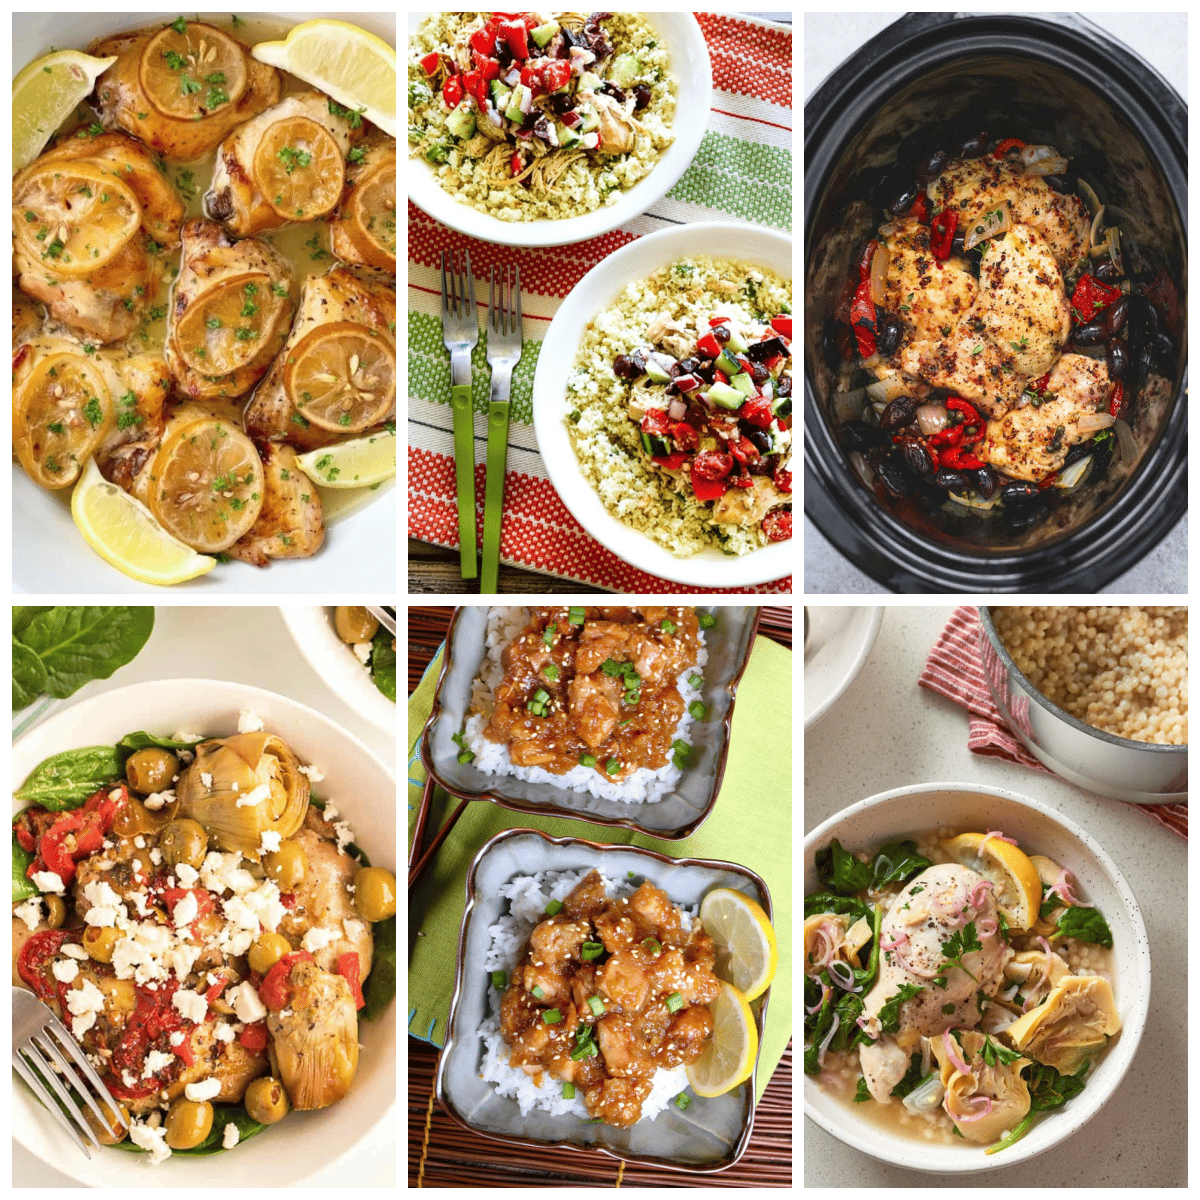 Slow Cooker Lemon Chicken Recipes collage of featured recipes